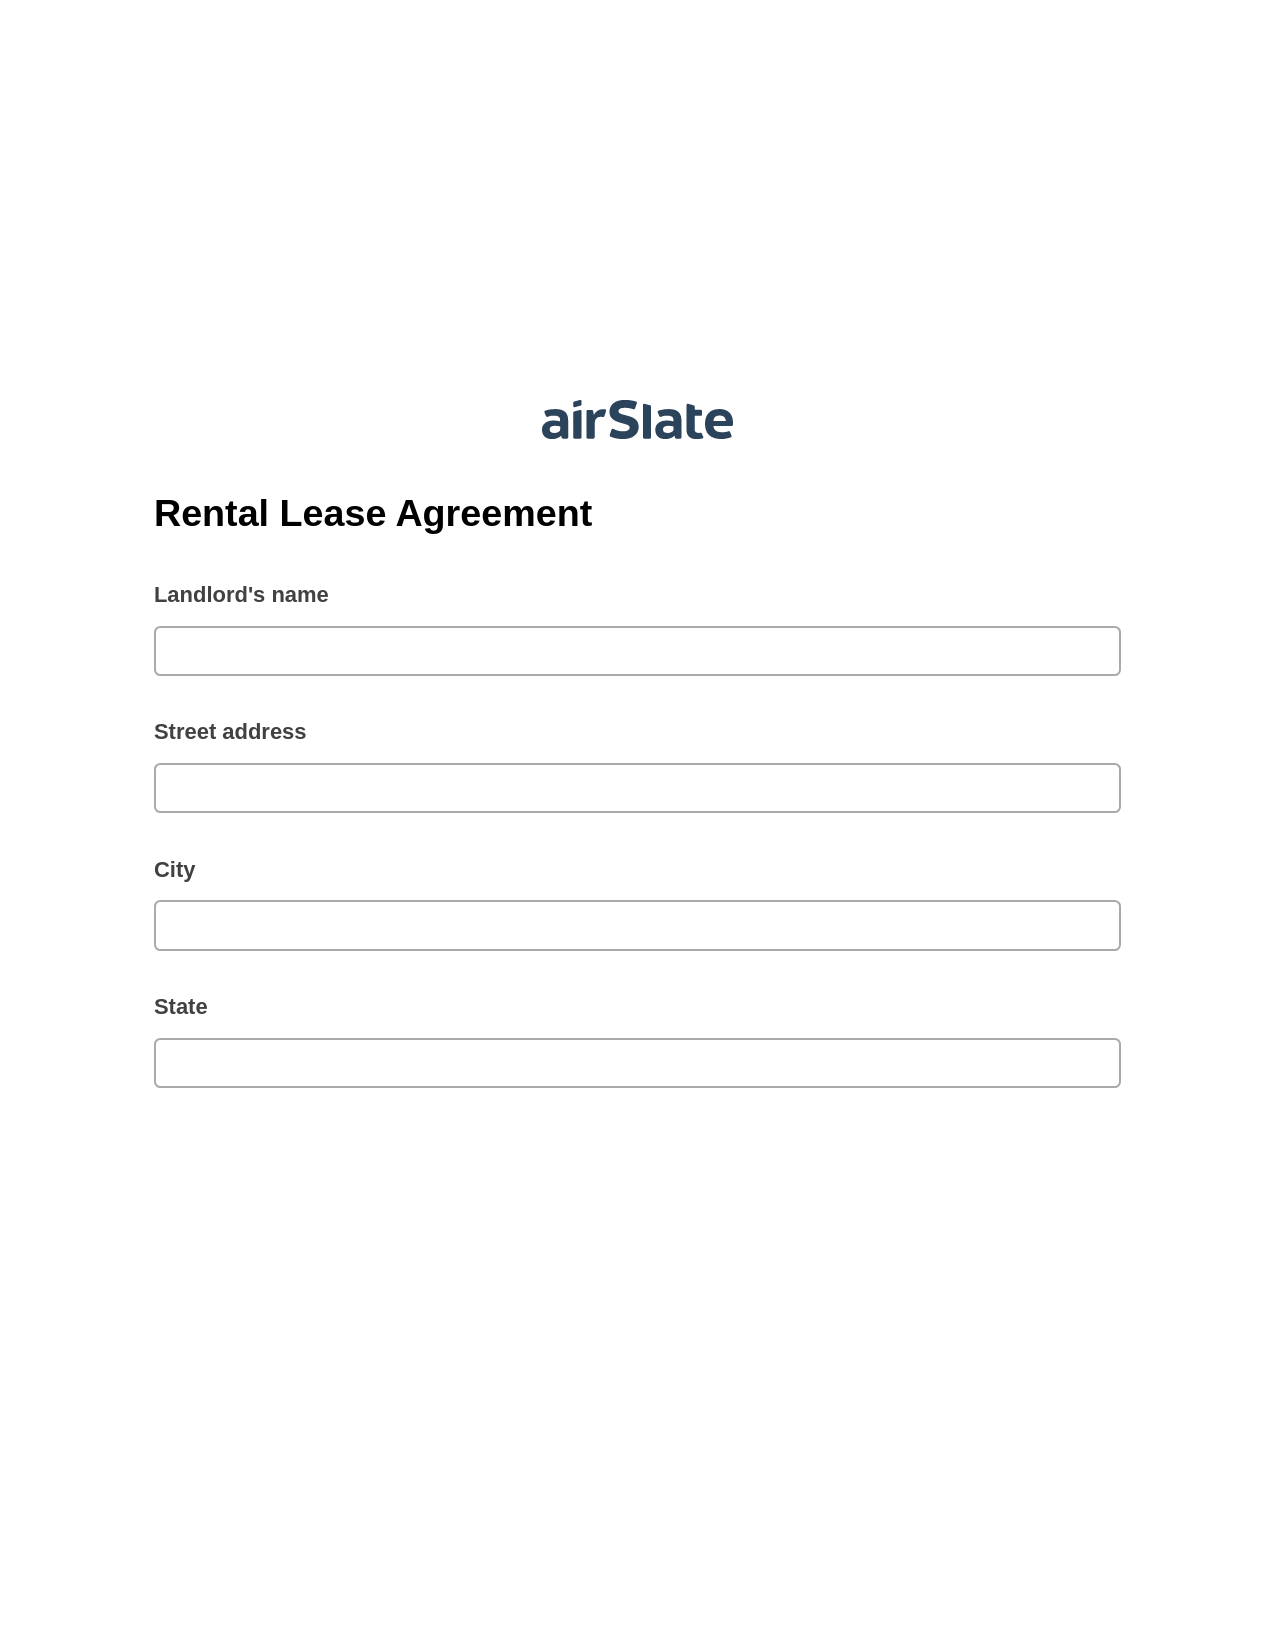 Rental Lease Agreement Pre-fill from CSV File Dropdown Options Bot, System Bot - Create a Slate in another Flow, Slack Notification Postfinish Bot